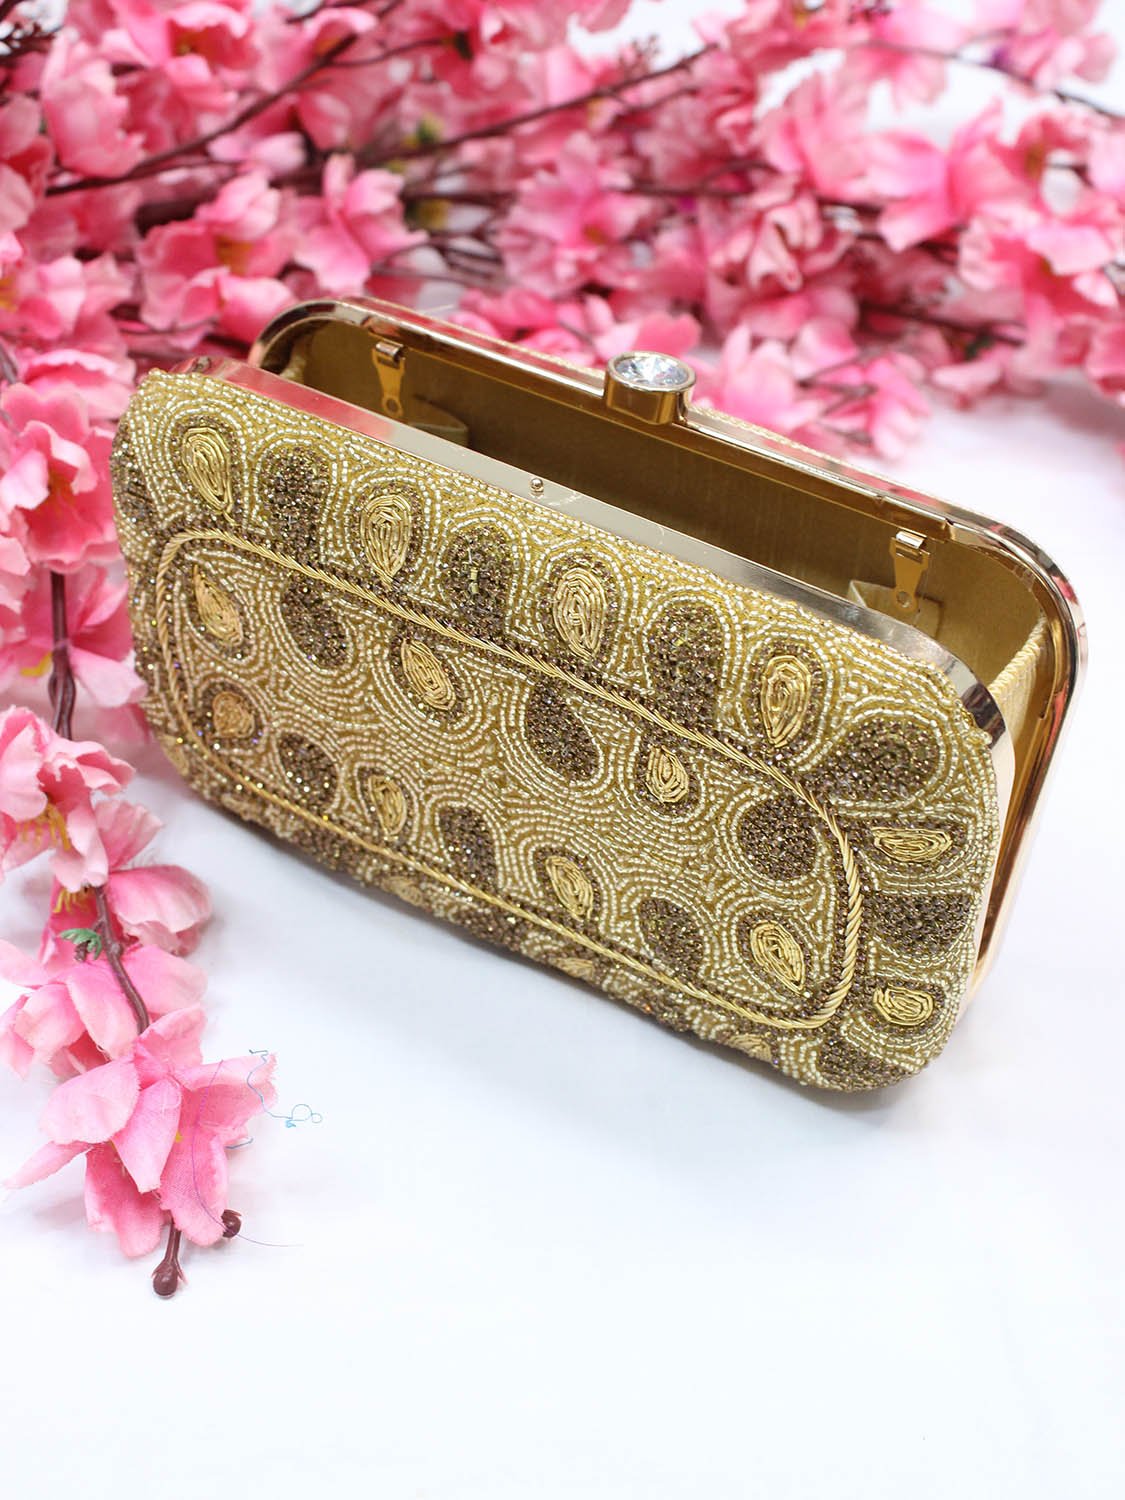 Exclusive Clutch Sling Bags for Elevated Style - Golden Sparkle